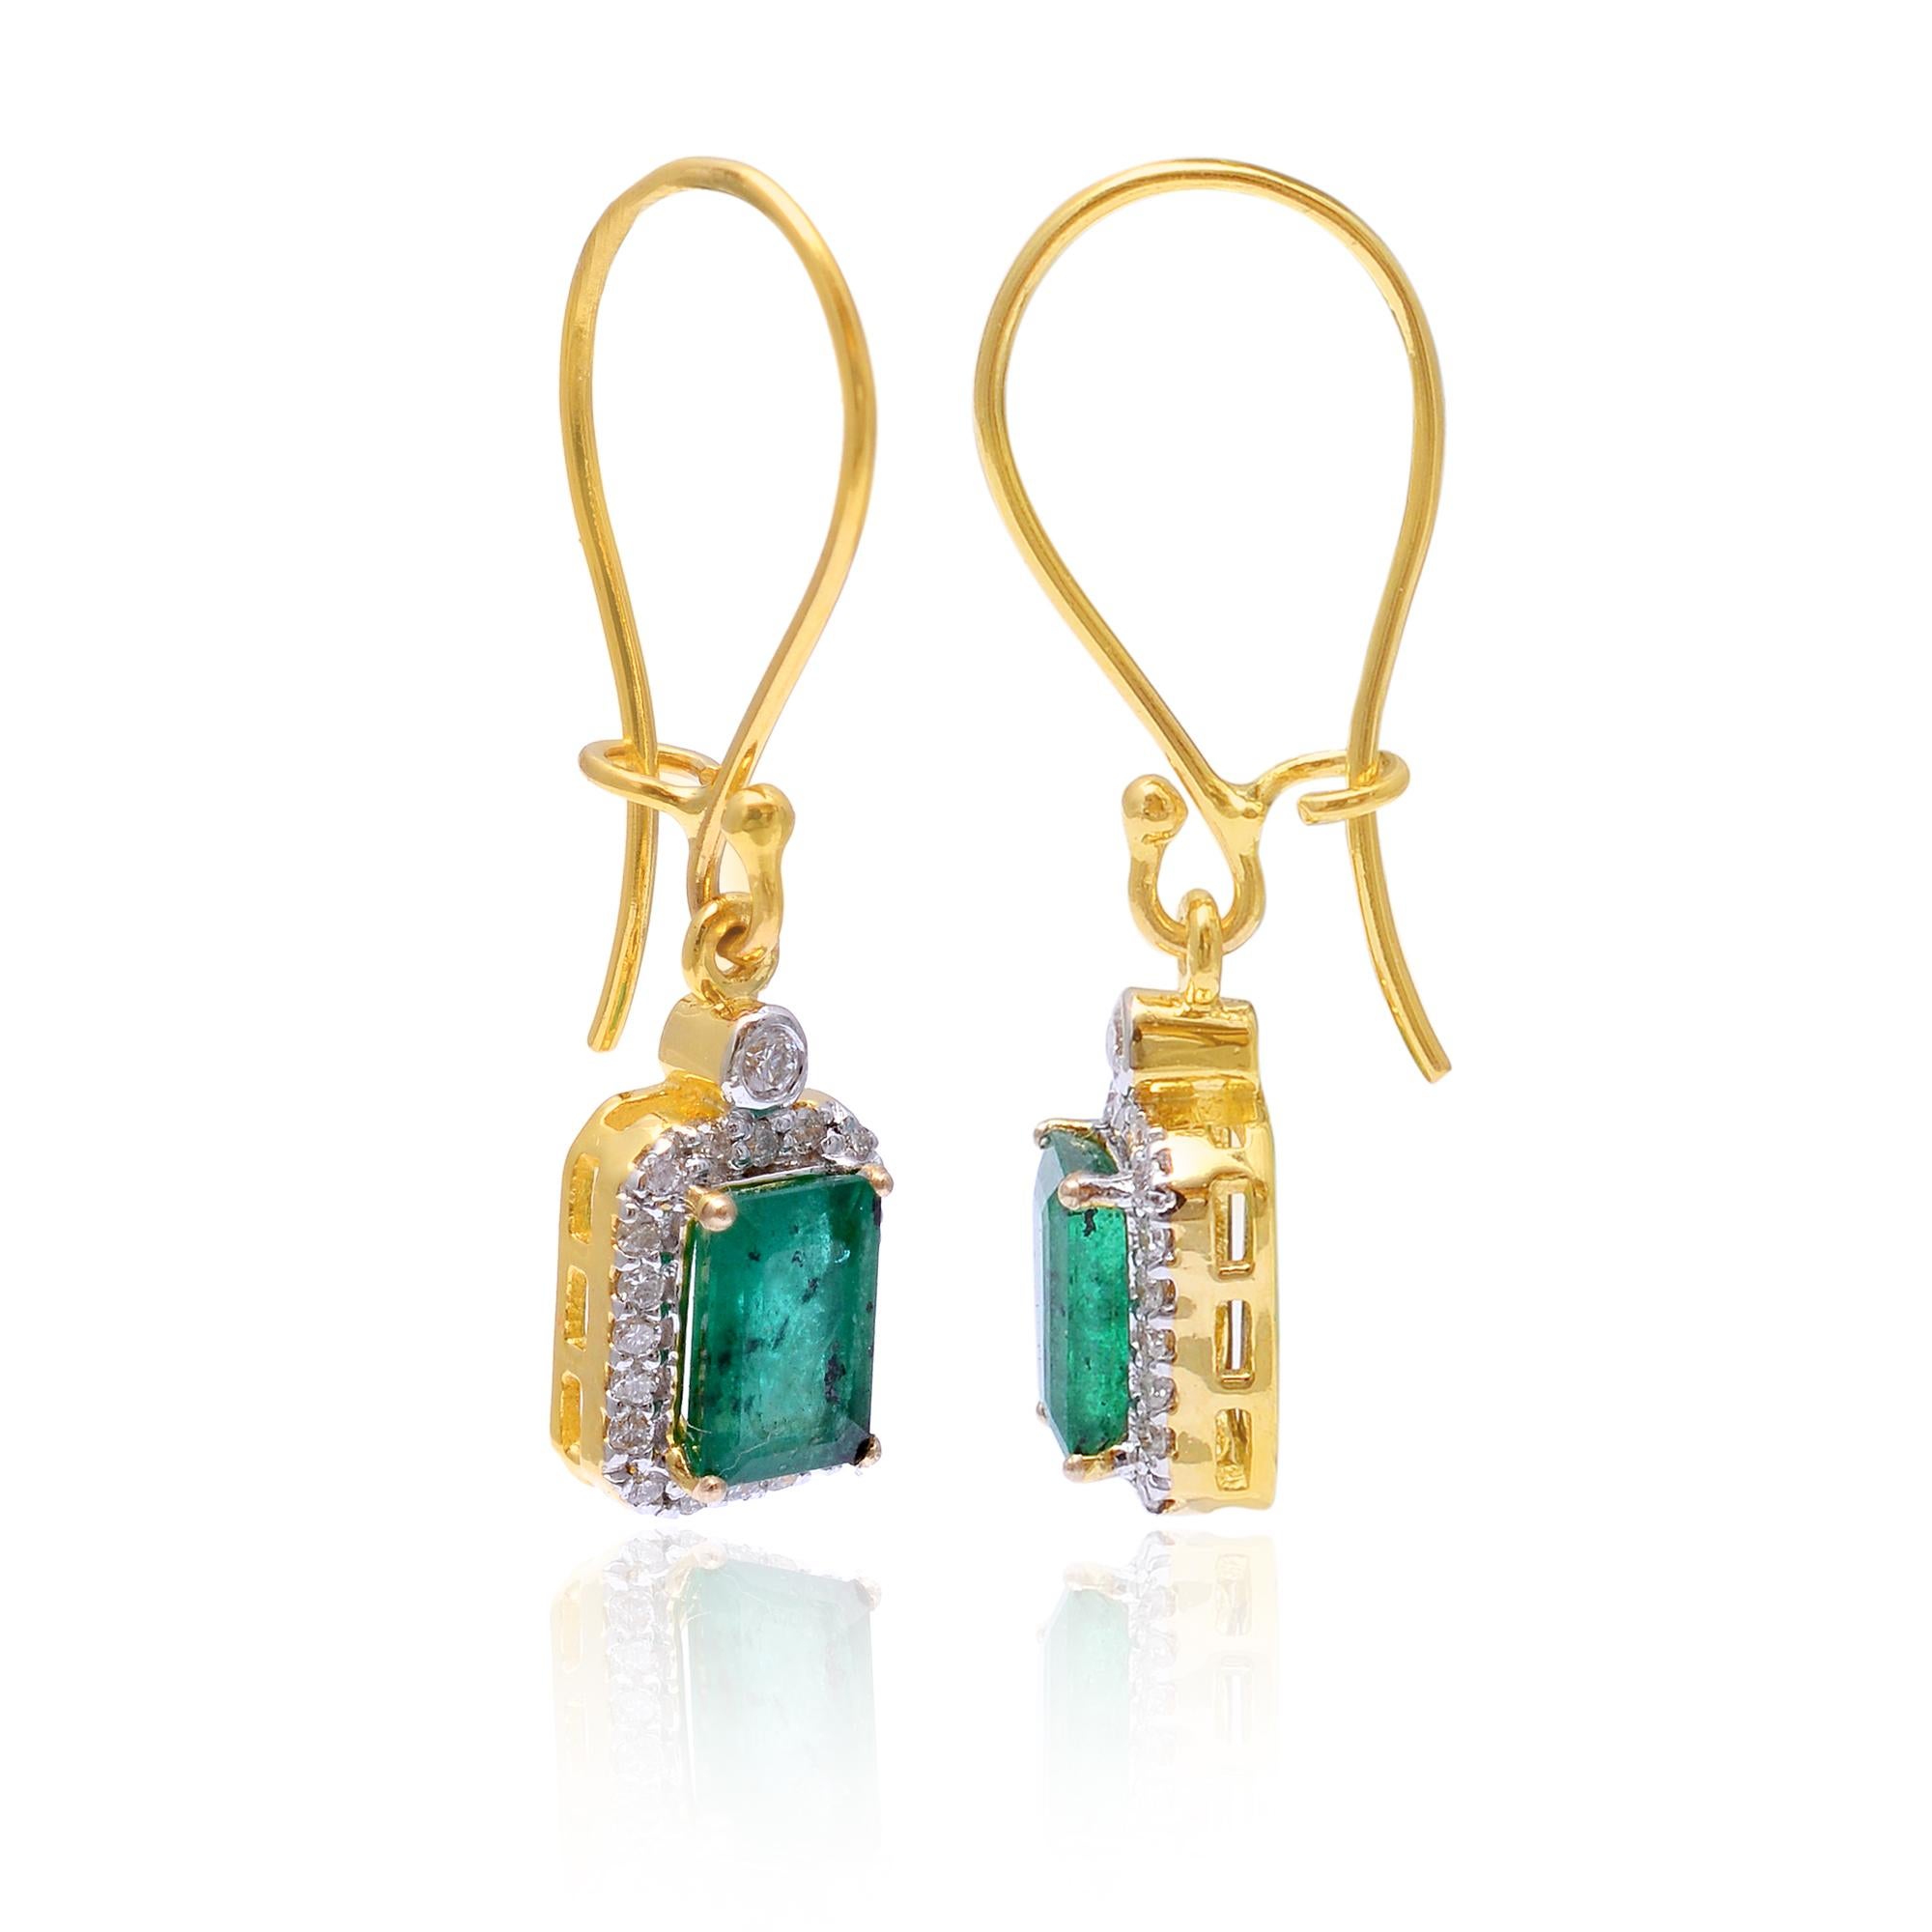 Brilliant Cut Emerald Dangle Earrings with Diamond in 14k Gold For Sale